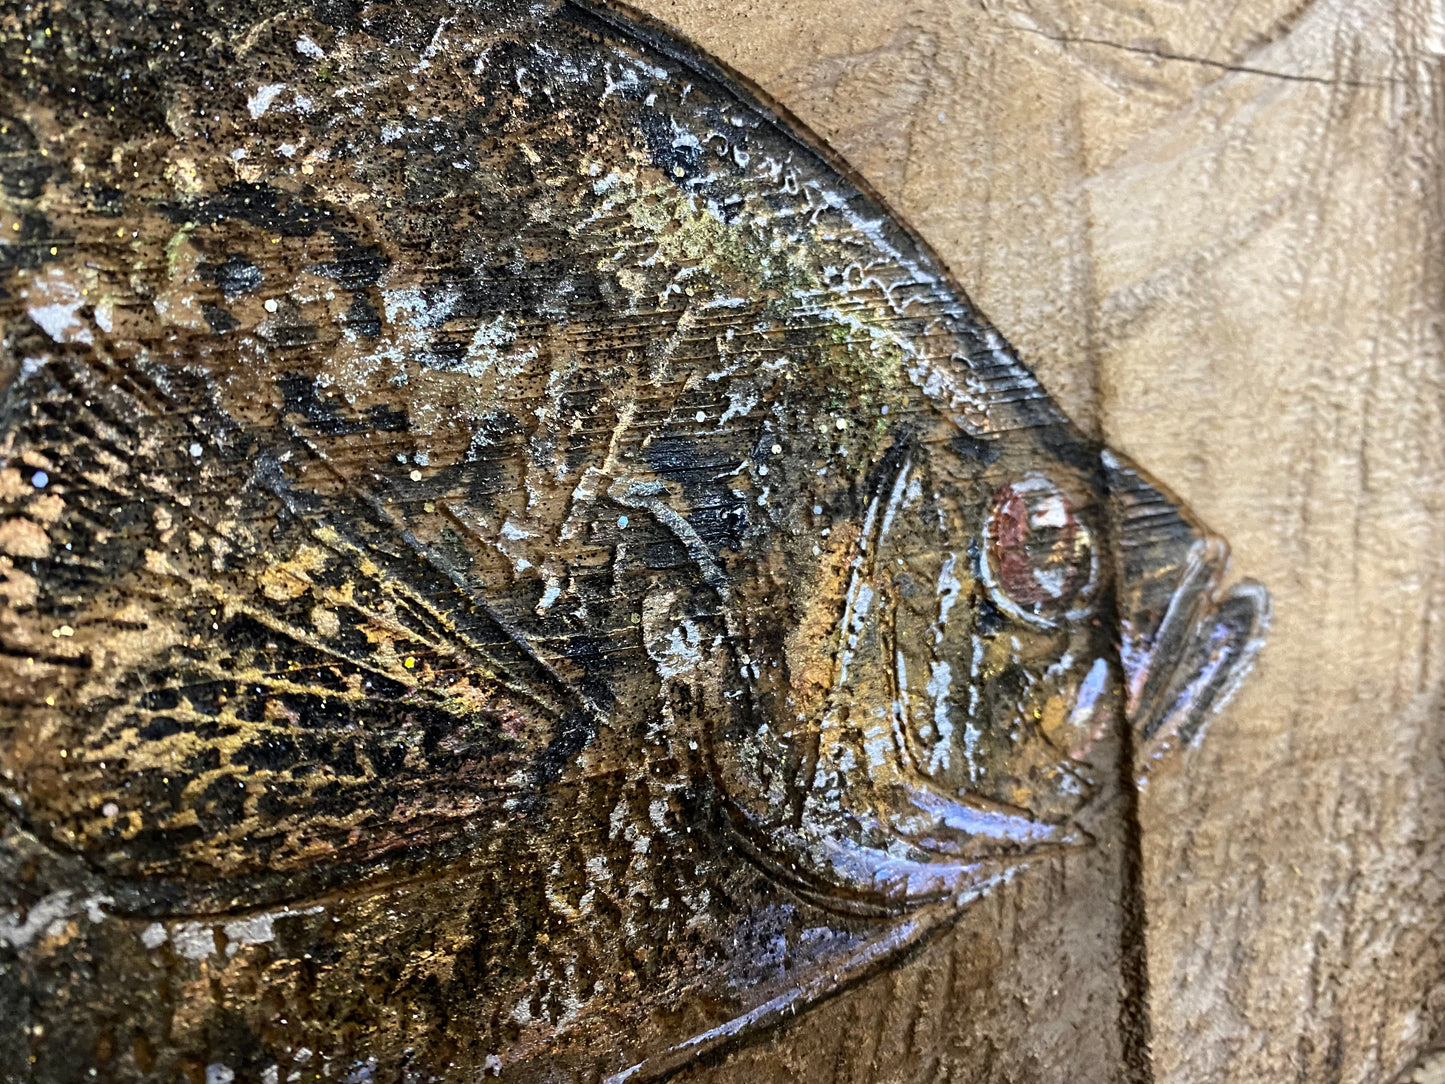 Crappie (Sac Au Lait) Wood Engraving "One of a Kind"